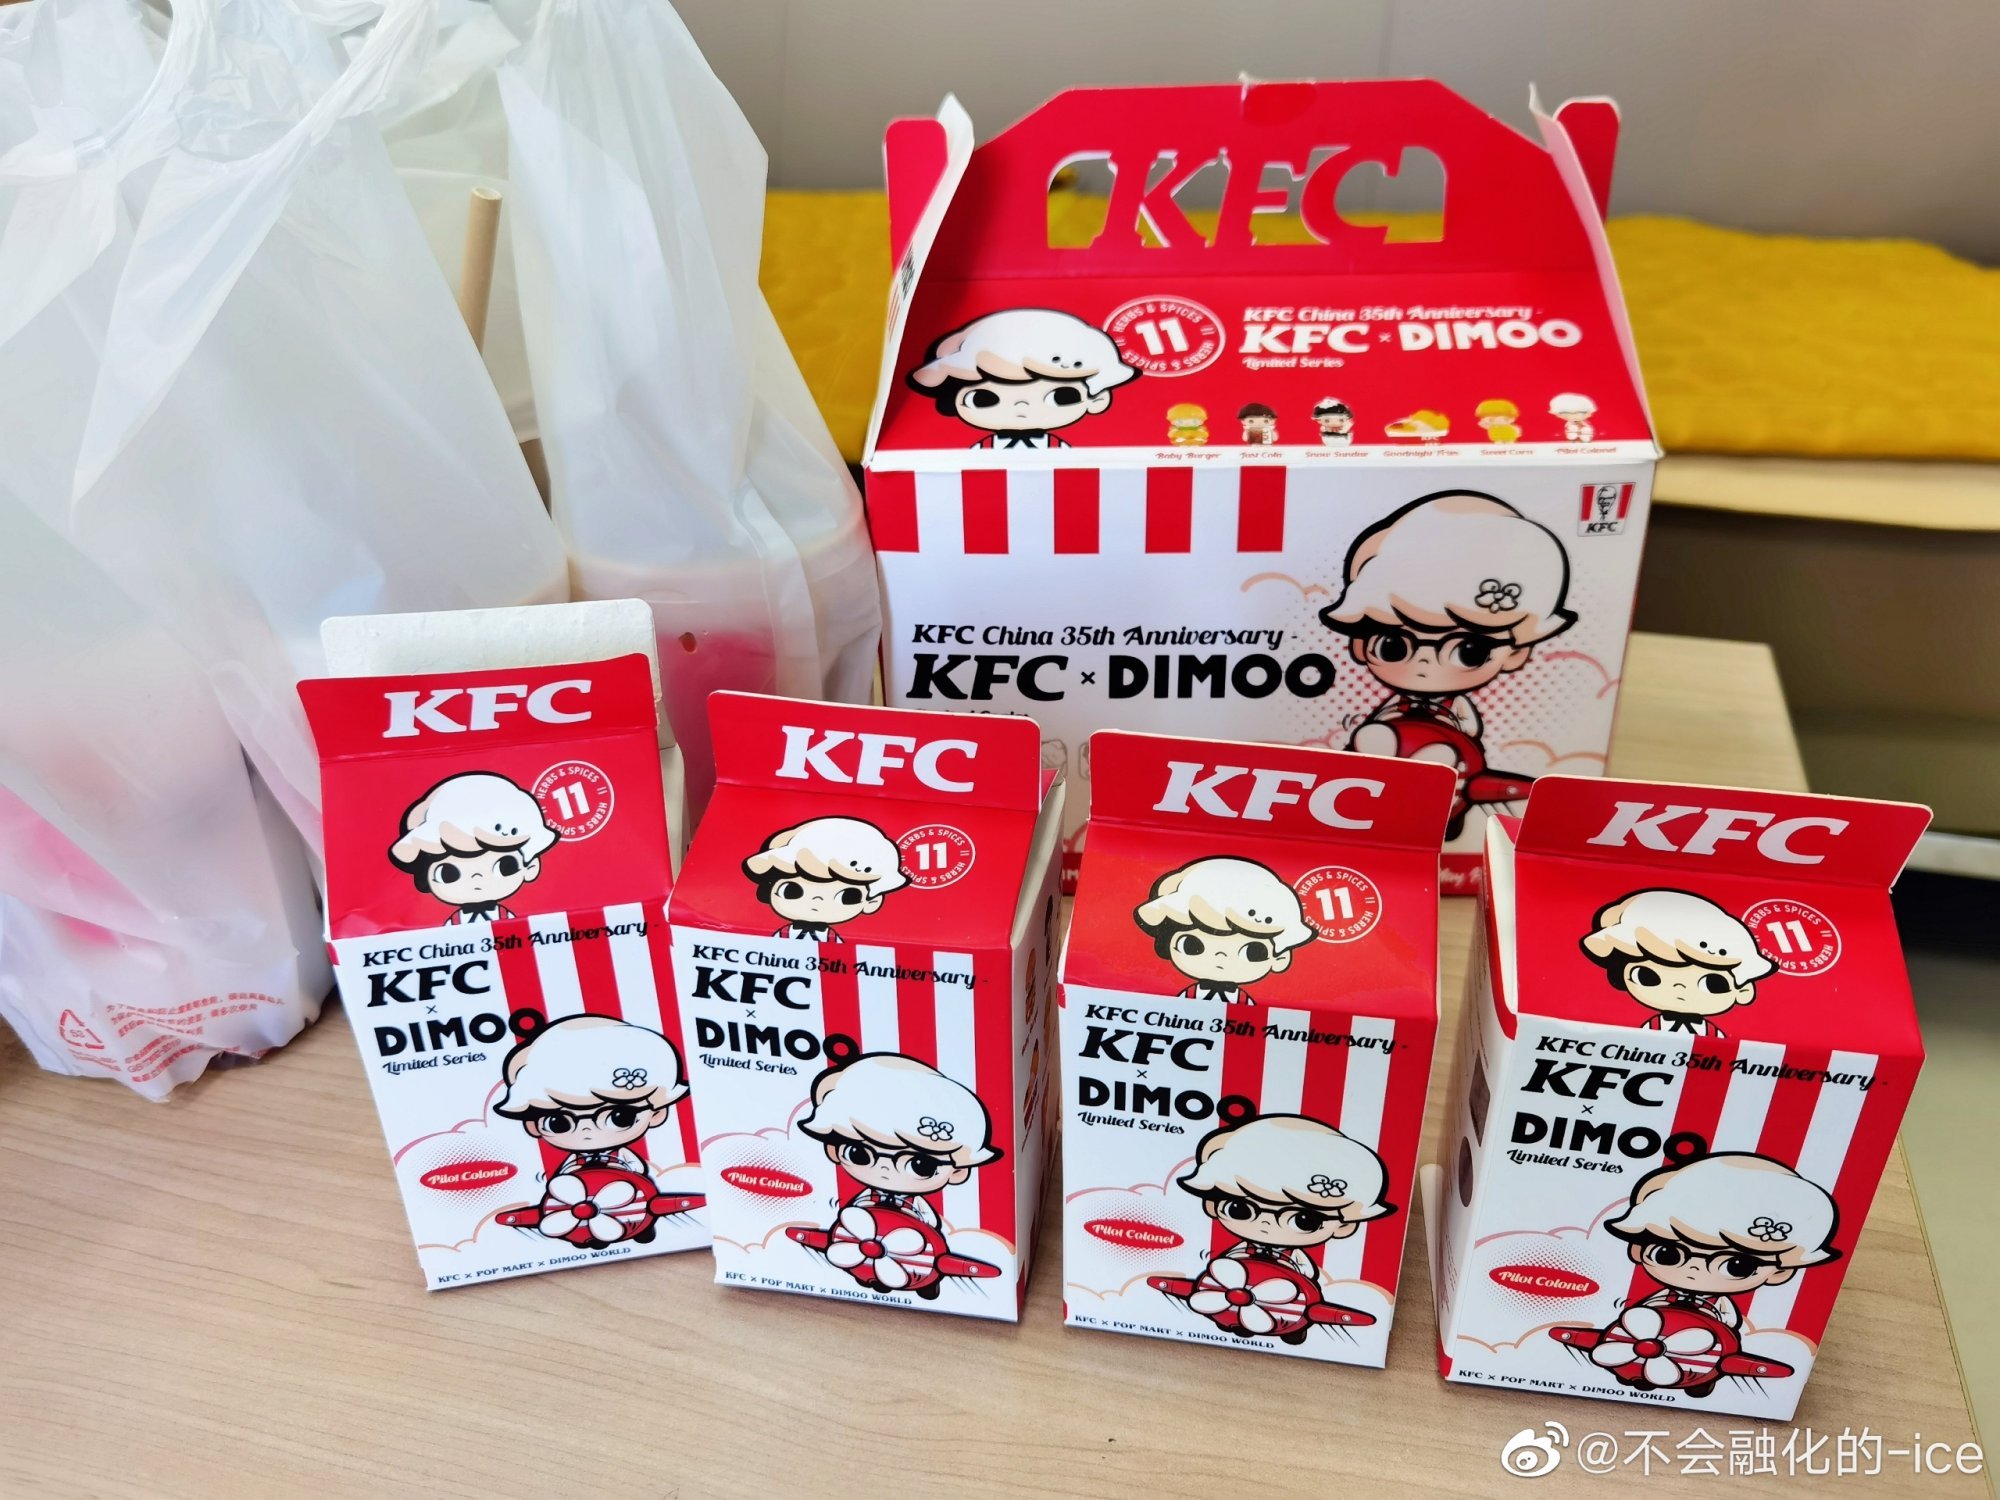 KFC China’s Dimoo ‘blind boxes’ under fire as toy promotion fuels ...